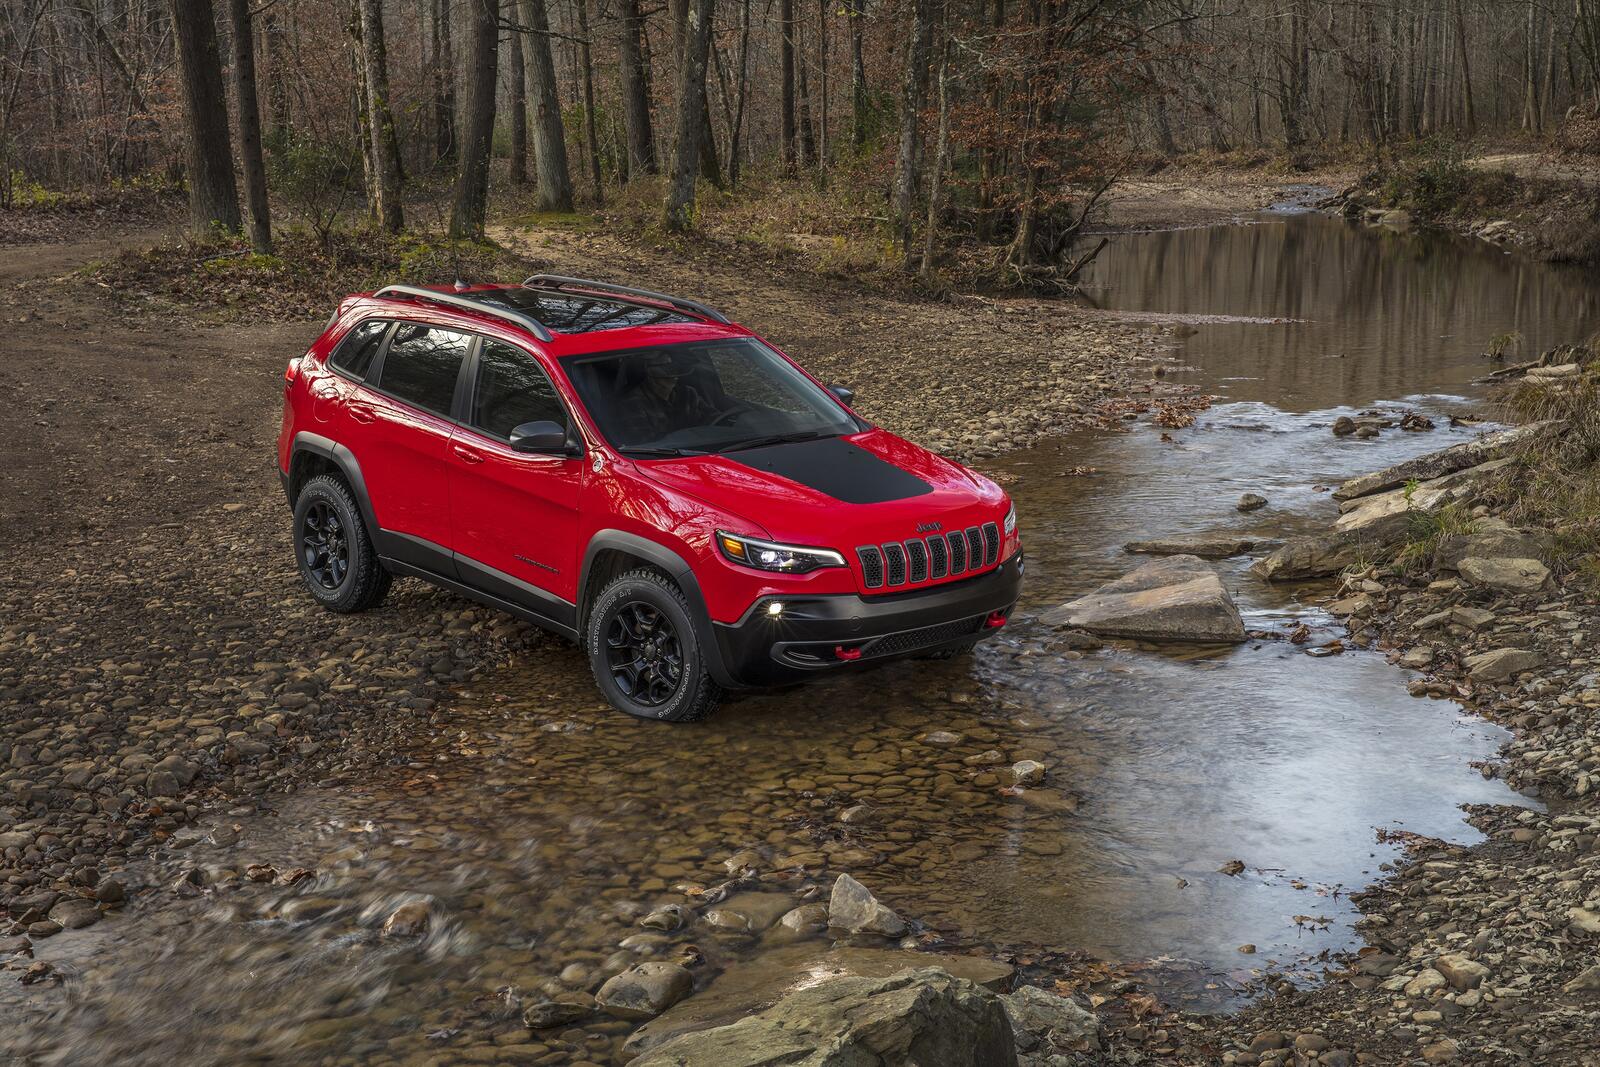 Wallpapers Jeep Cherokee red river on the desktop